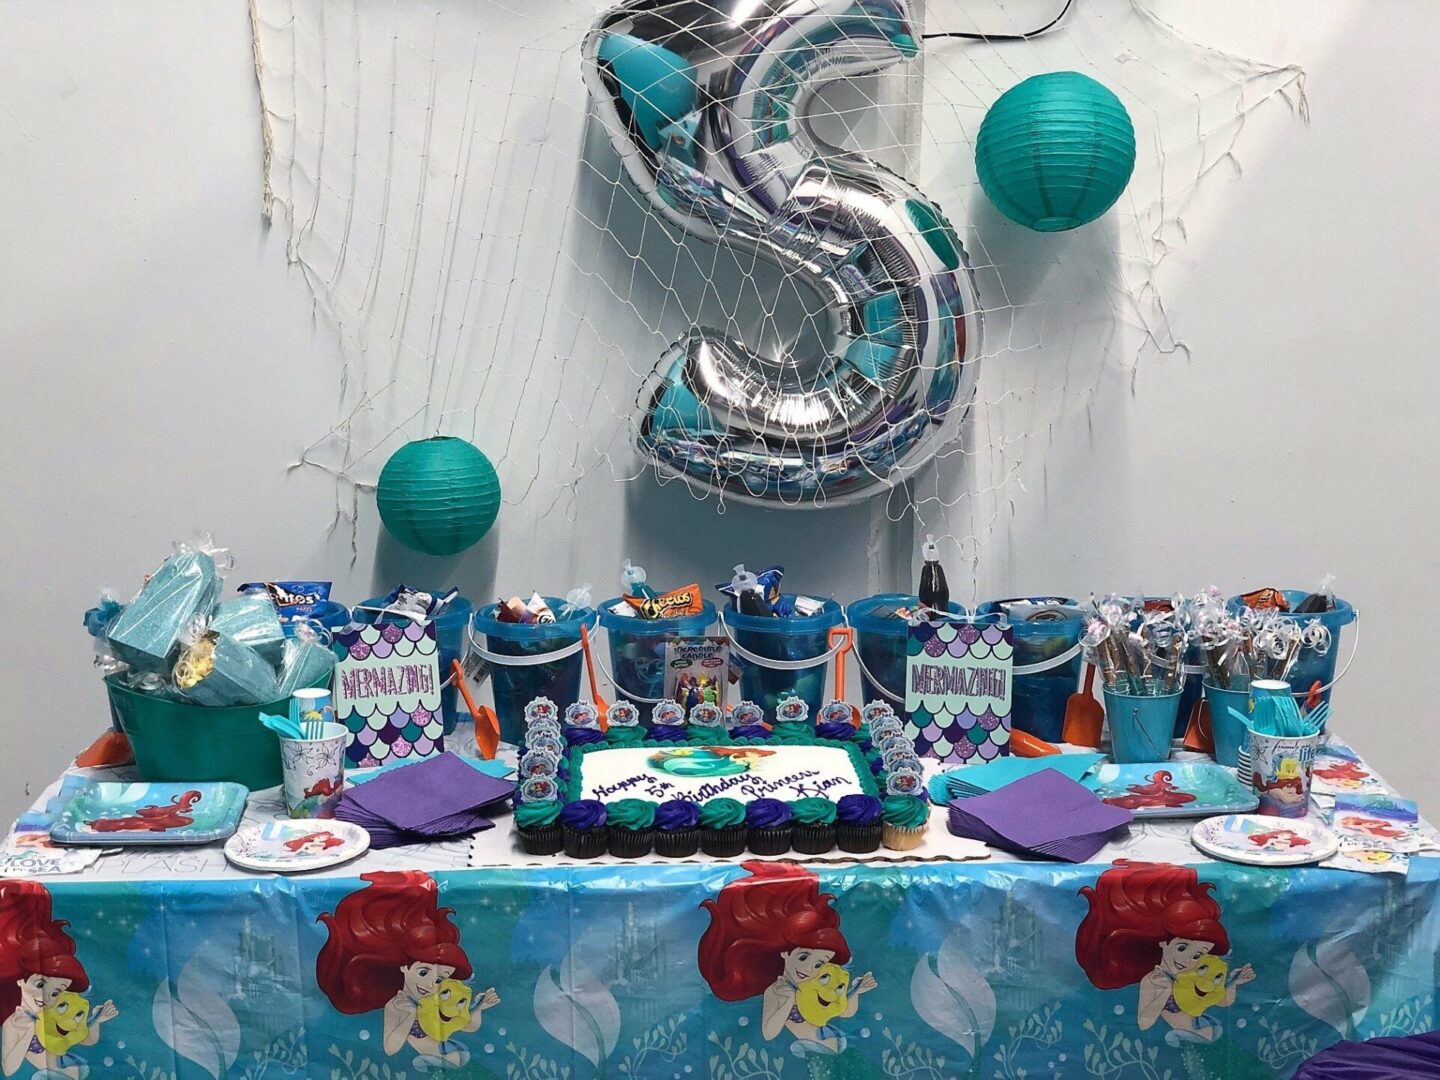 A table with a cake and balloons on it